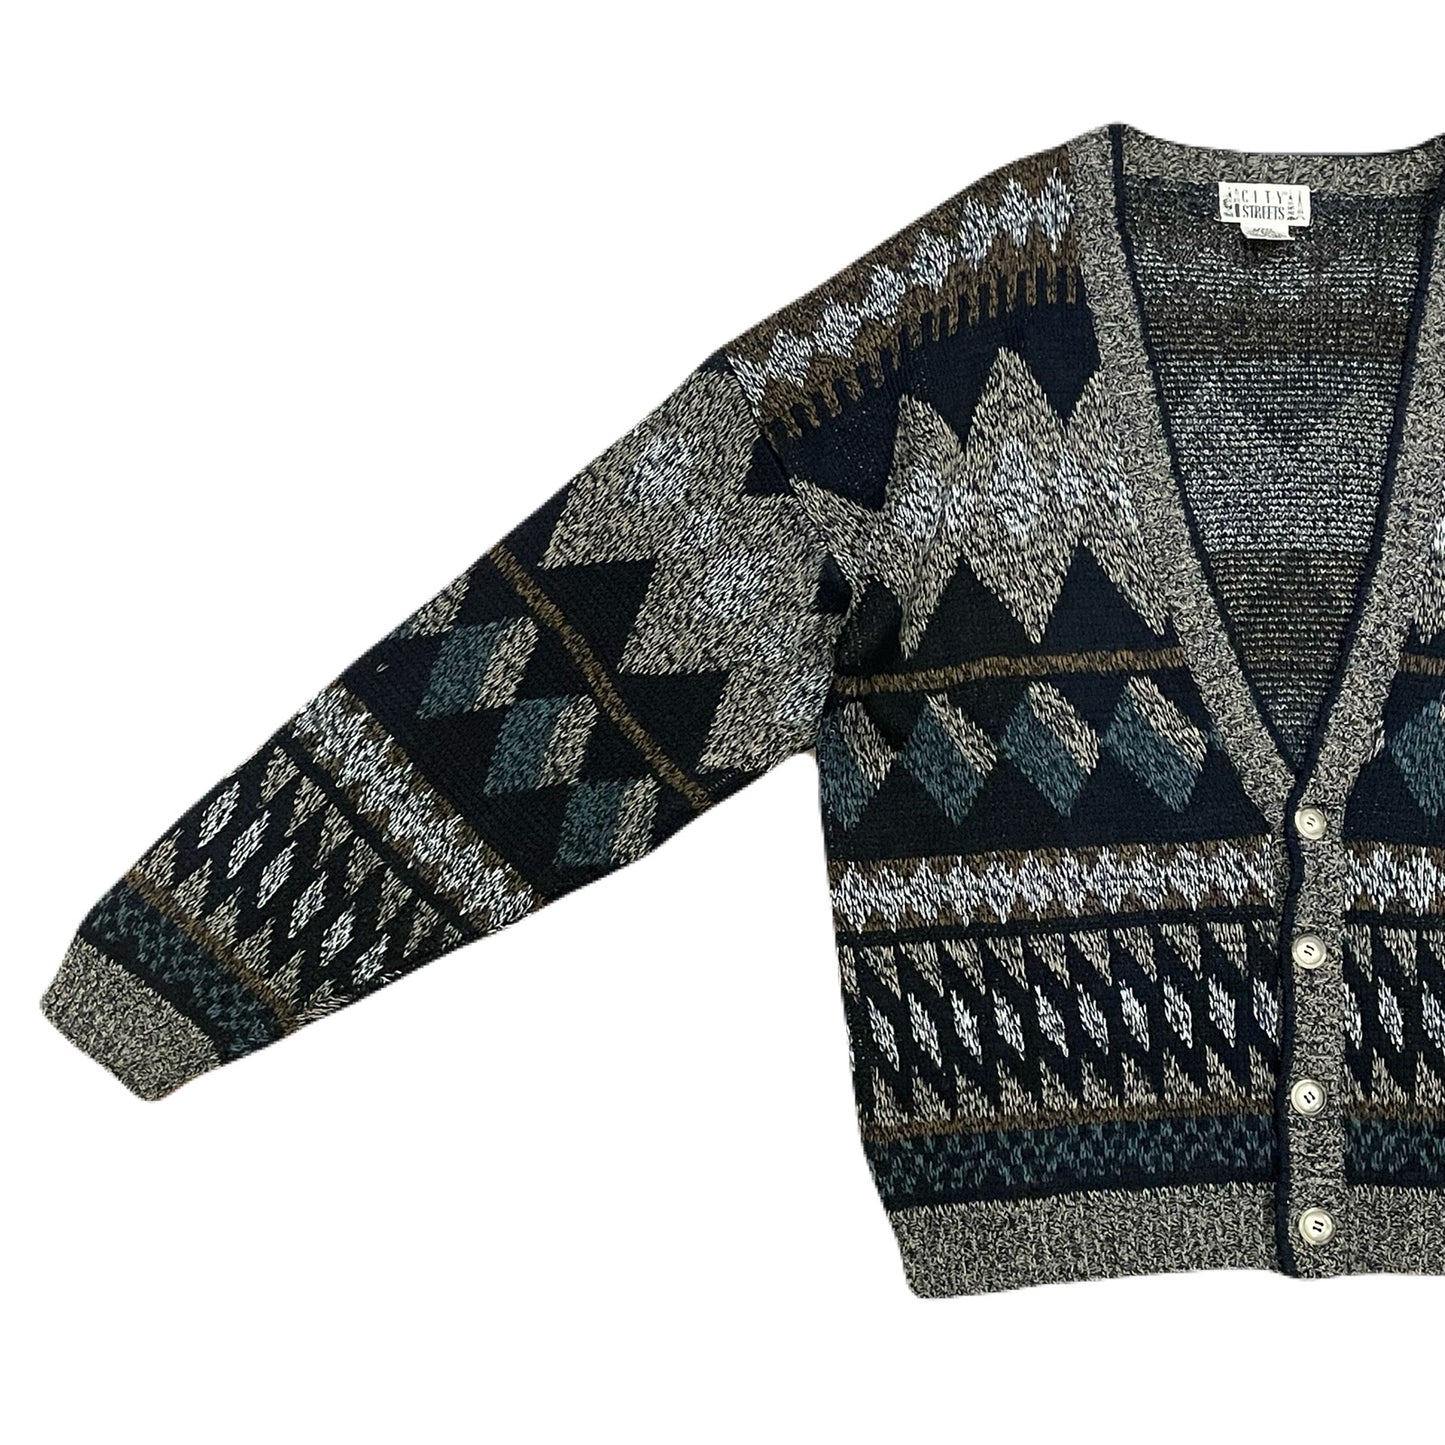 "CITY STREETS” All−over pattern cardigan　L